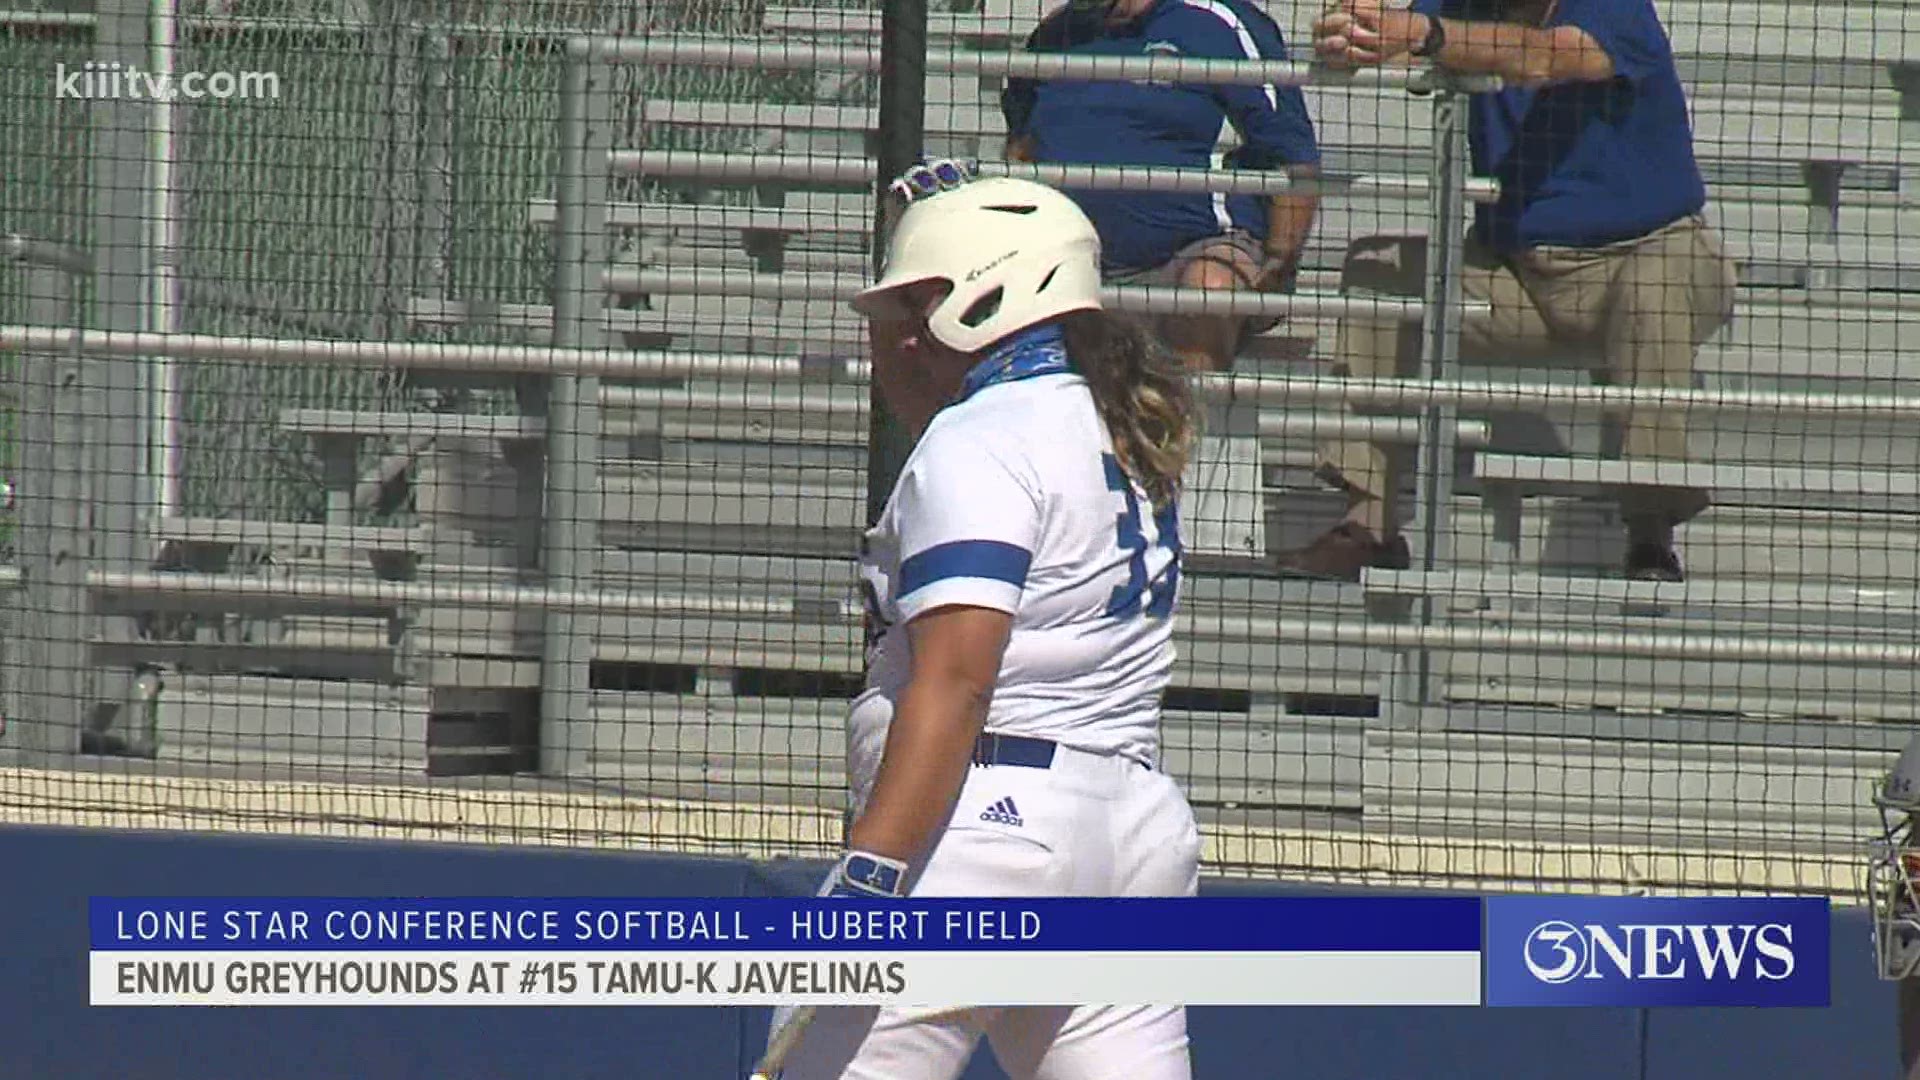 The Javelinas scored a total of 23 runs in the two wins over the Greyhounds Friday.